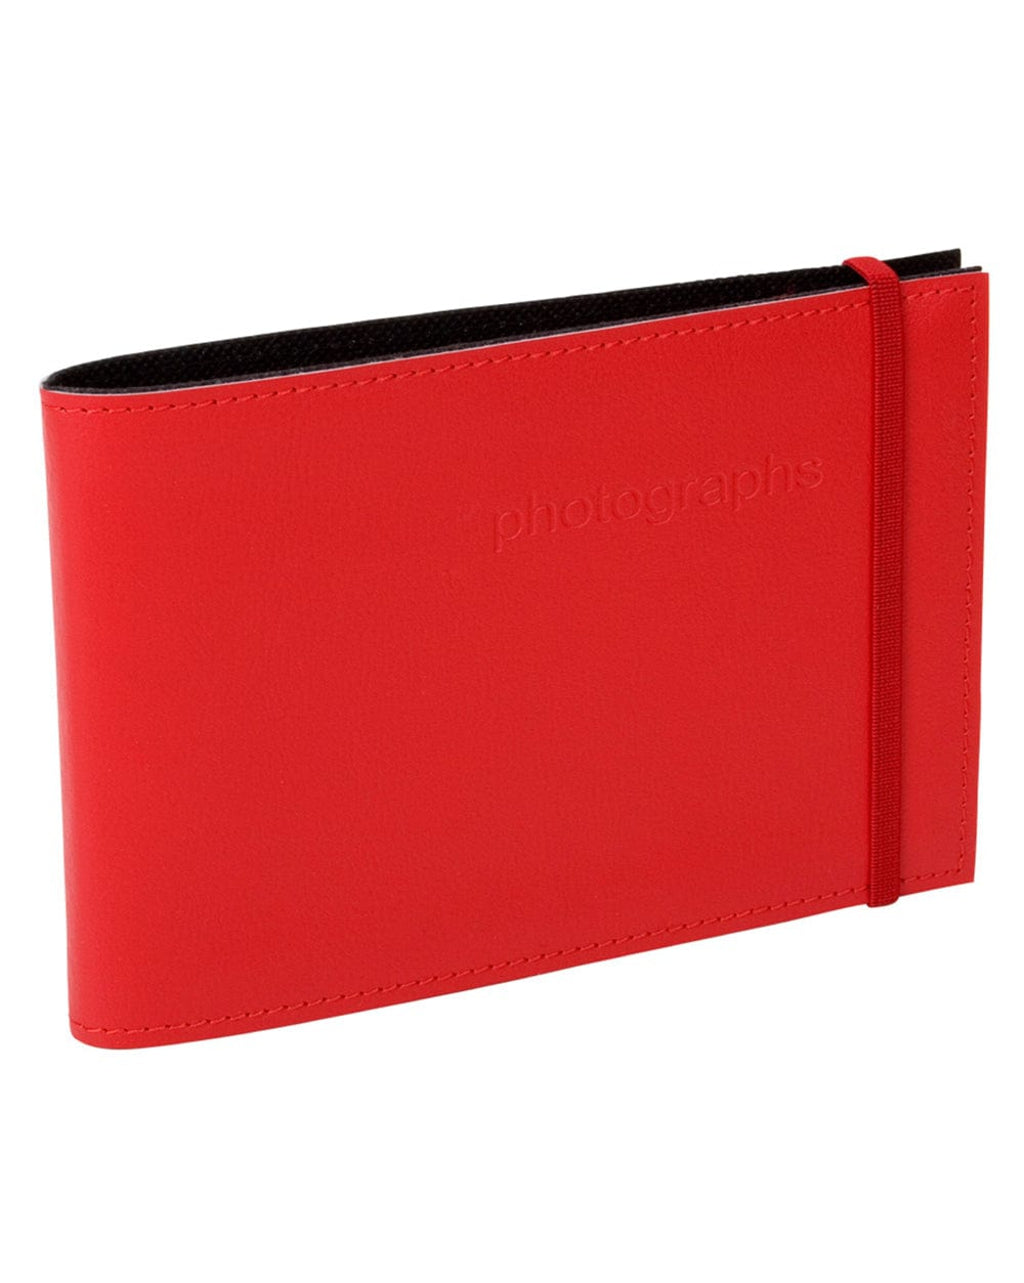 Citi Leather Red Slip-in Bragbook Photo Album from our Photo Albums collection by Profile Products Australia